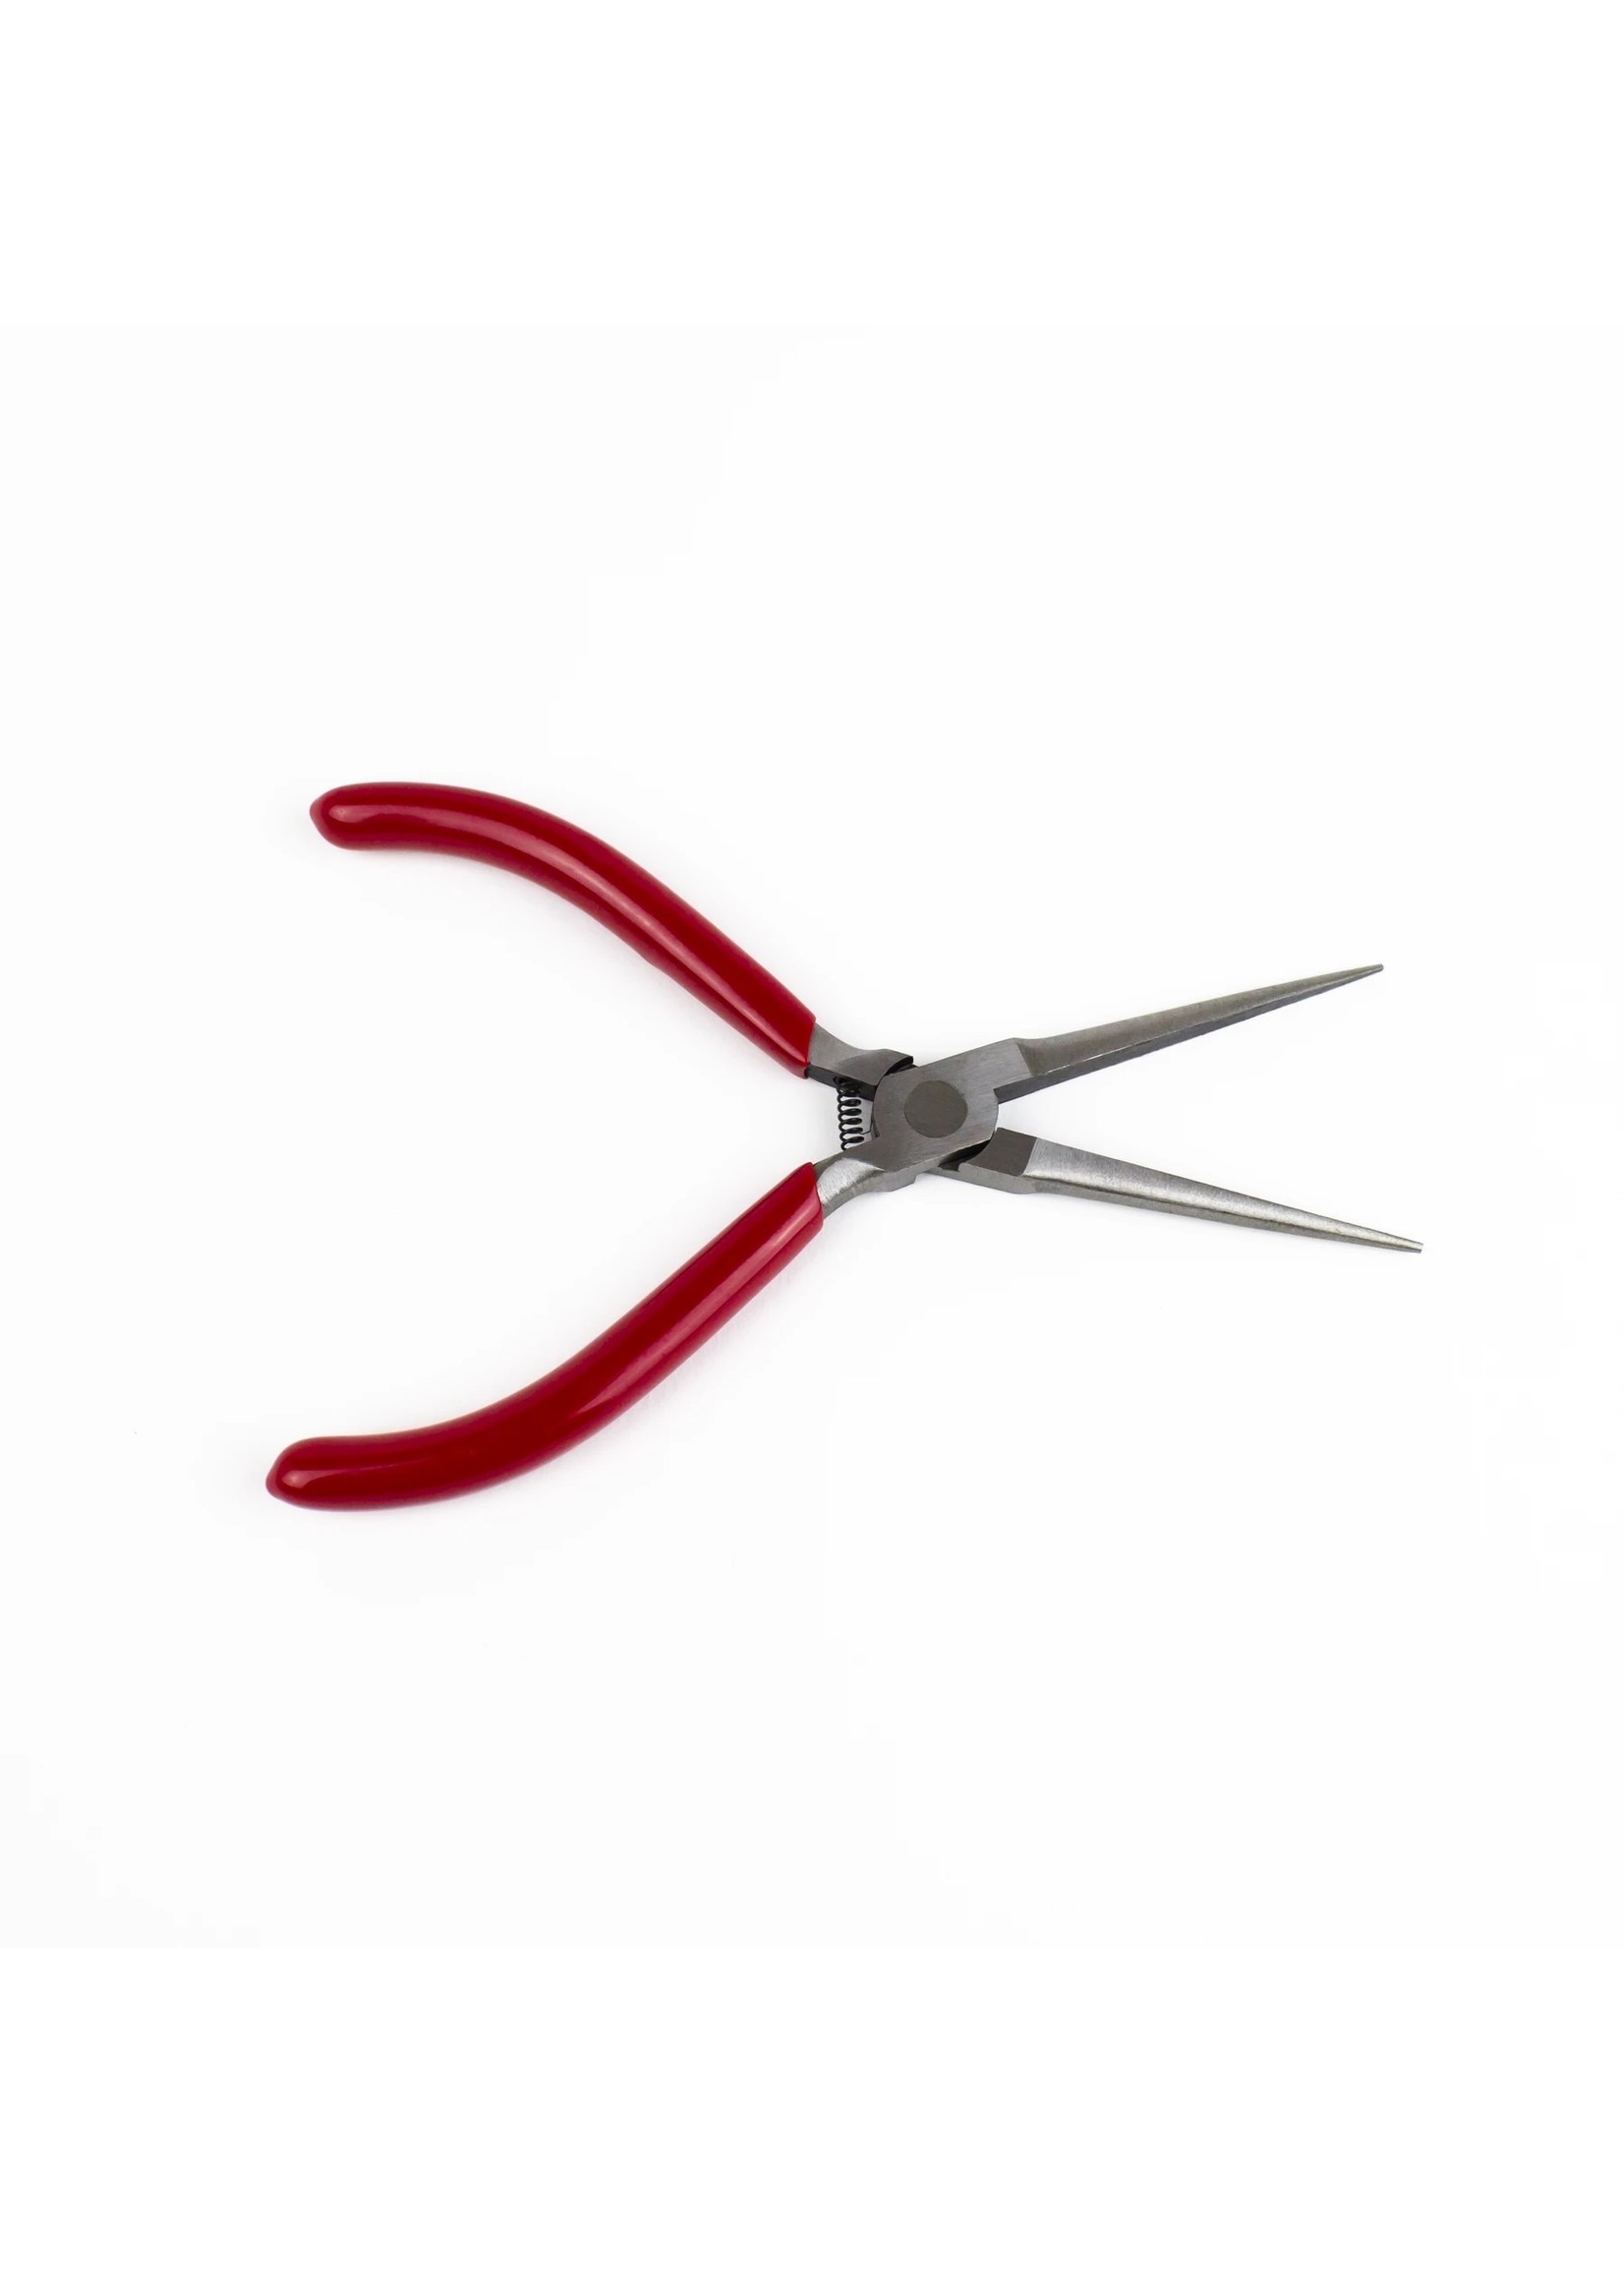 Excel 55561 - Long Needle Nose Pliers